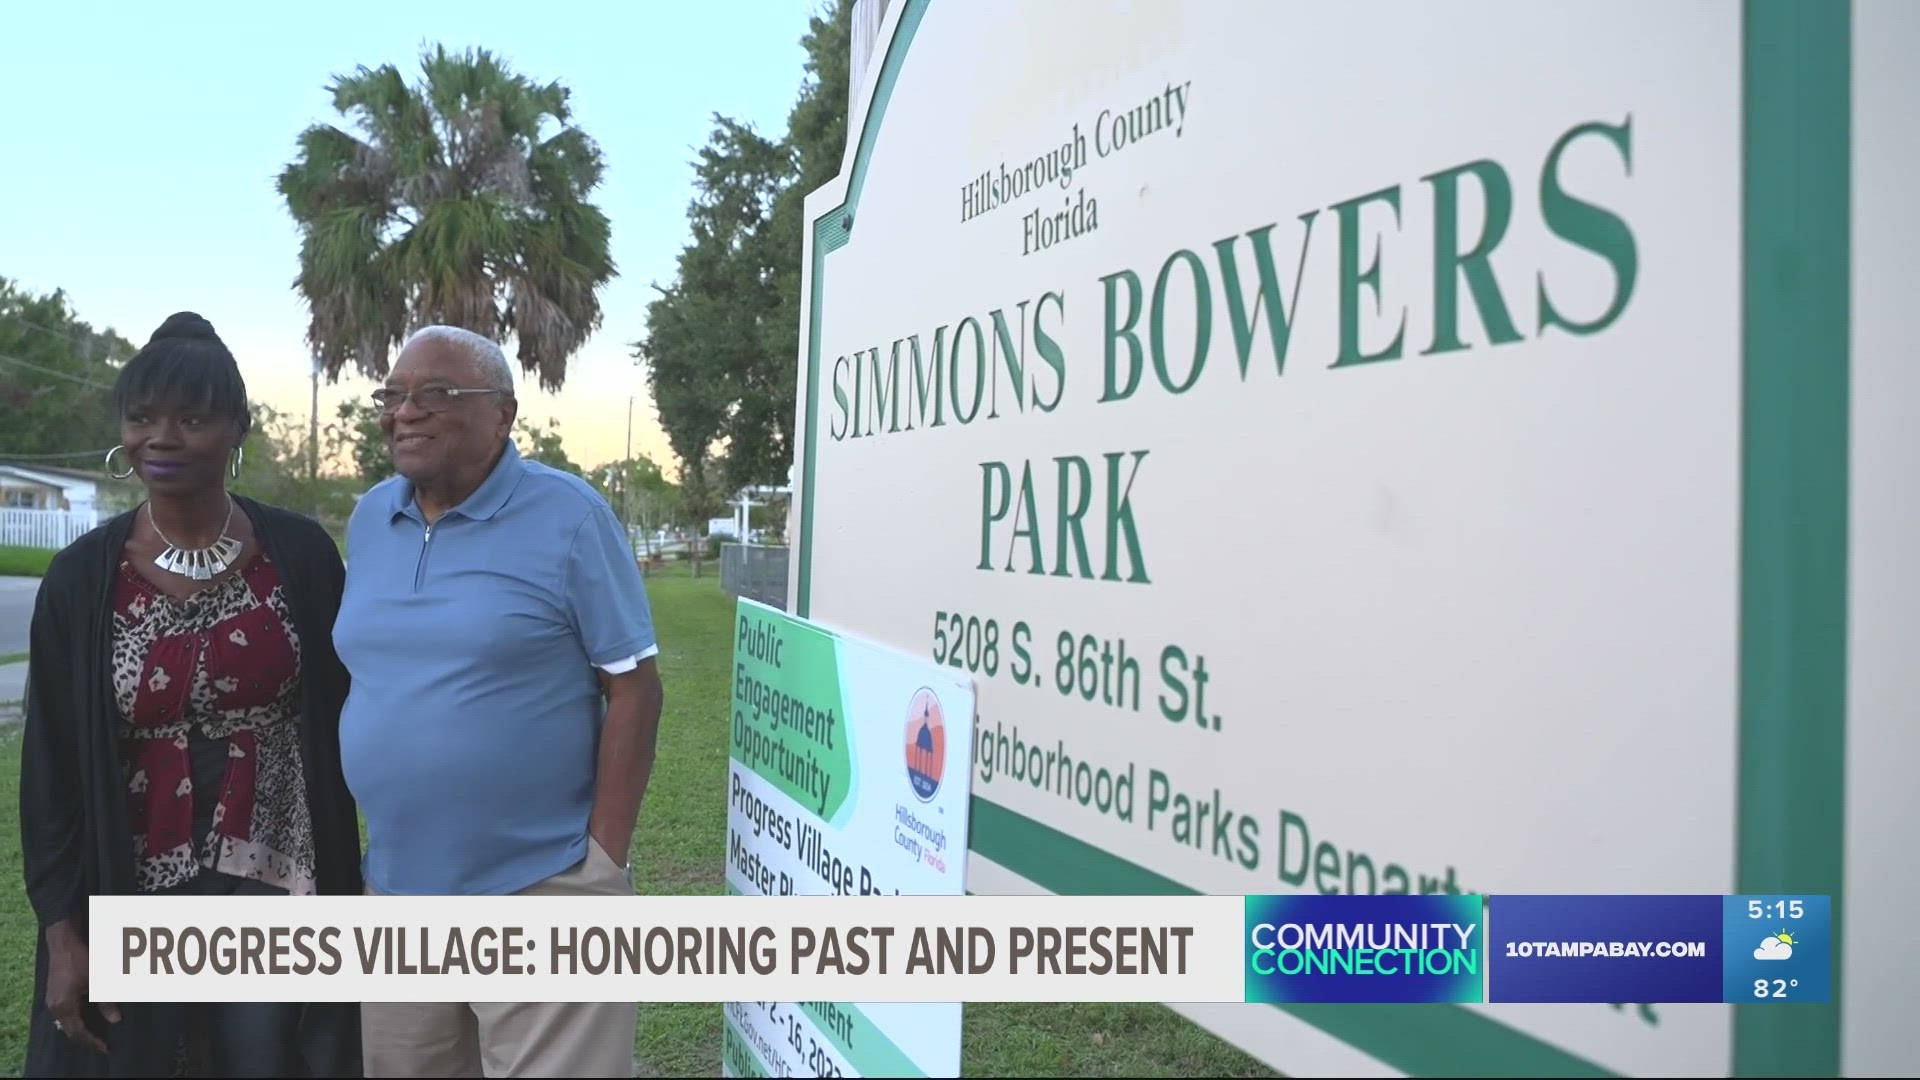 Tampa's first affordable housing suburb, created in the 1960s, allowed African Americans to own their first home.